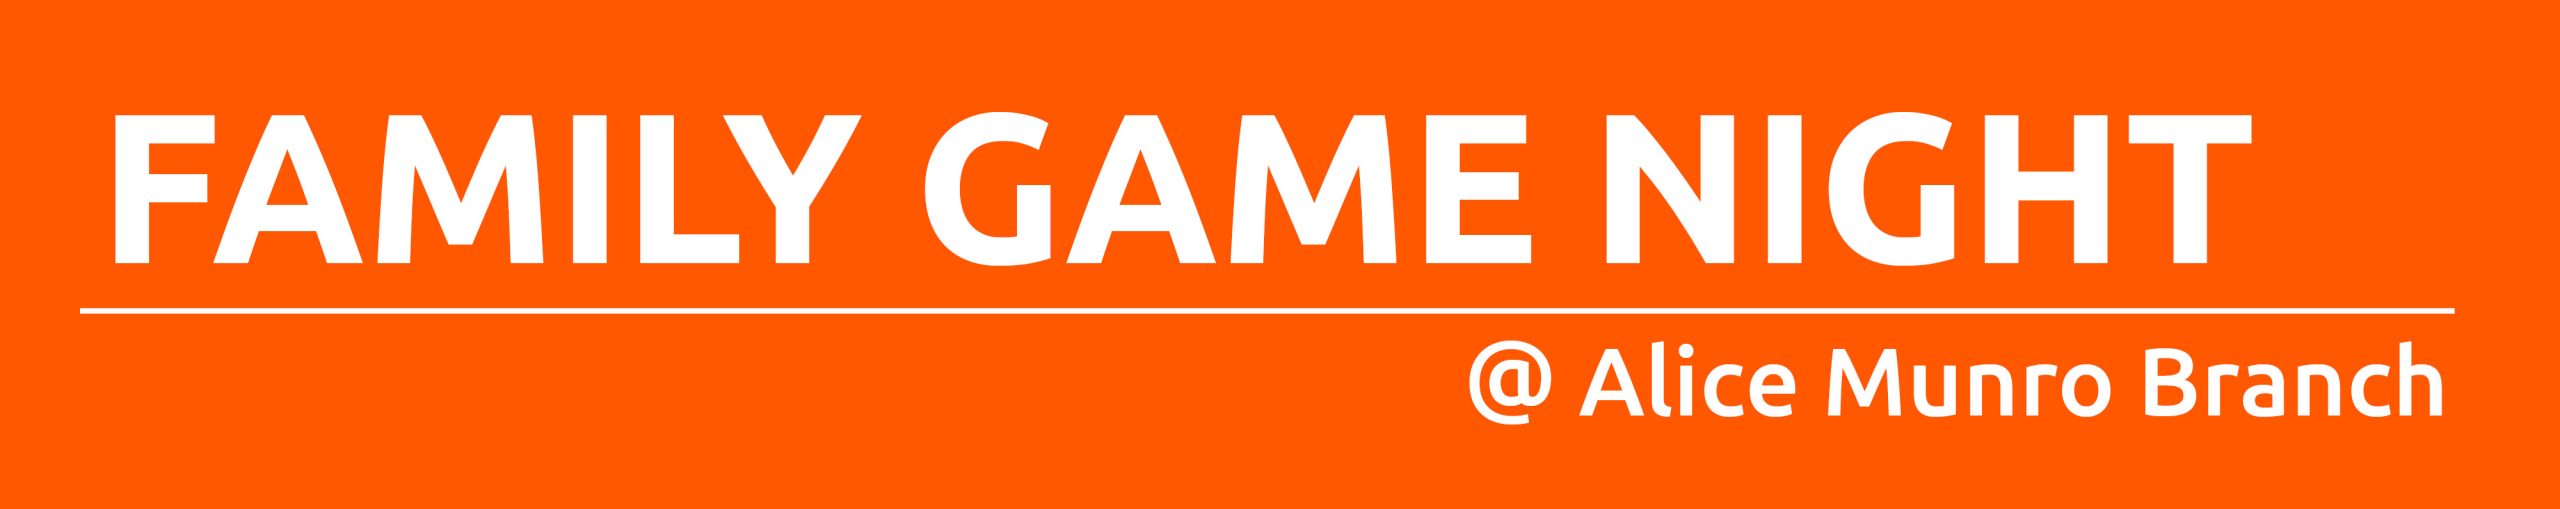 White text promoting Family Game Night at Alice Munro Branch with dark orange background